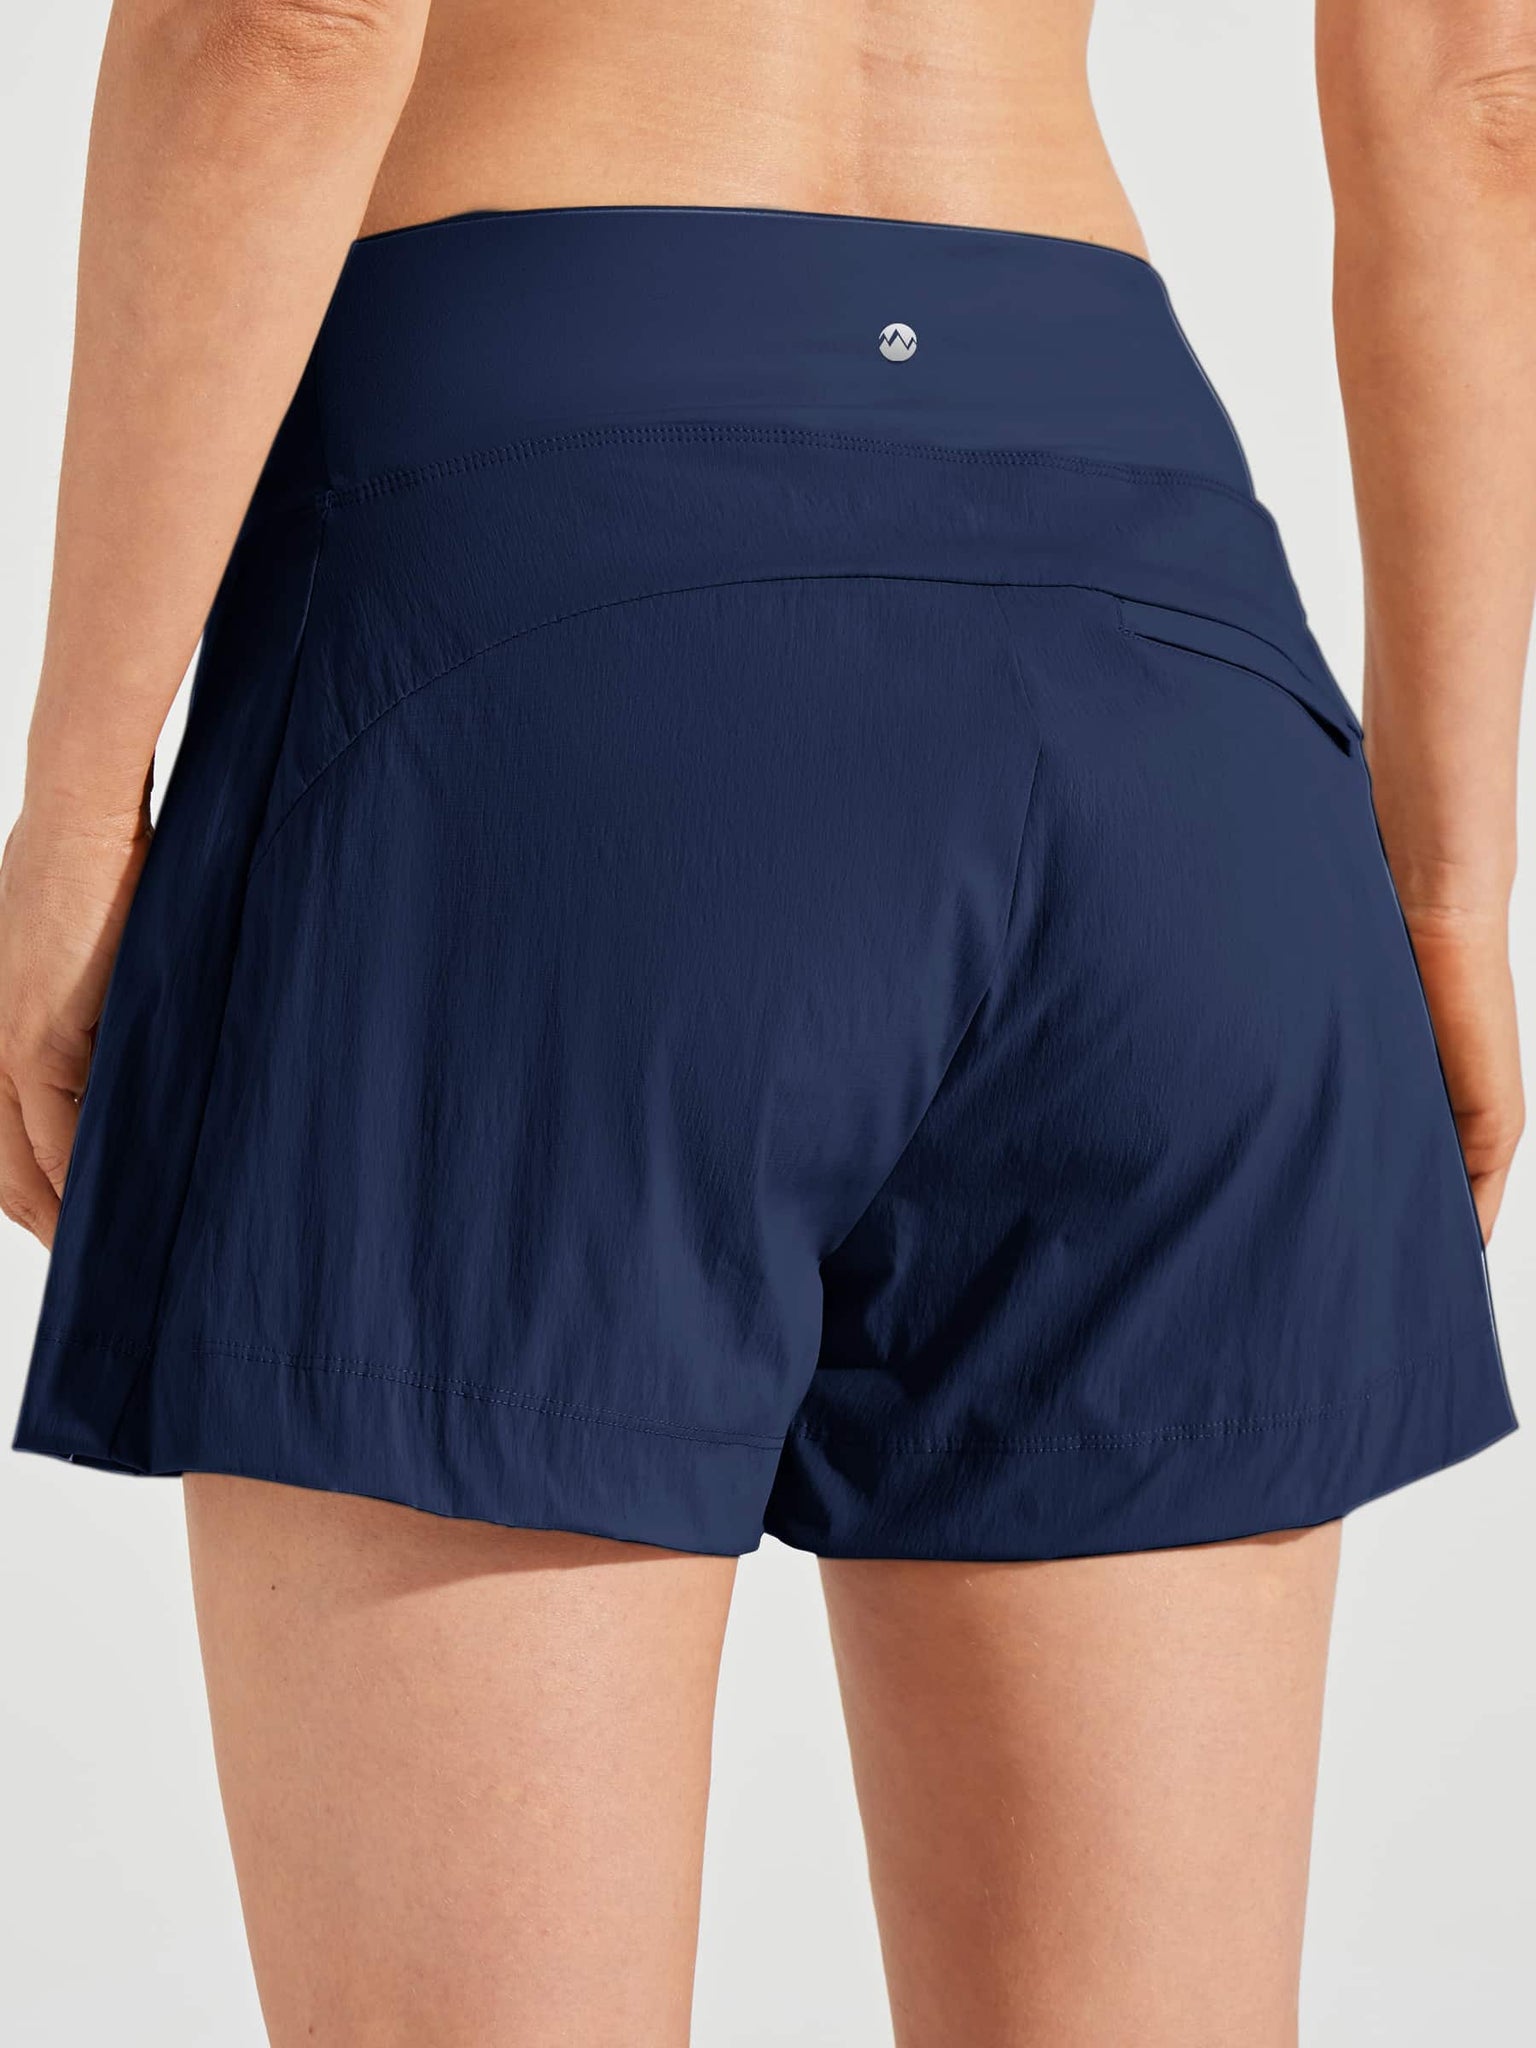 Willit Women's Training Loose Fit Shorts_Navy2